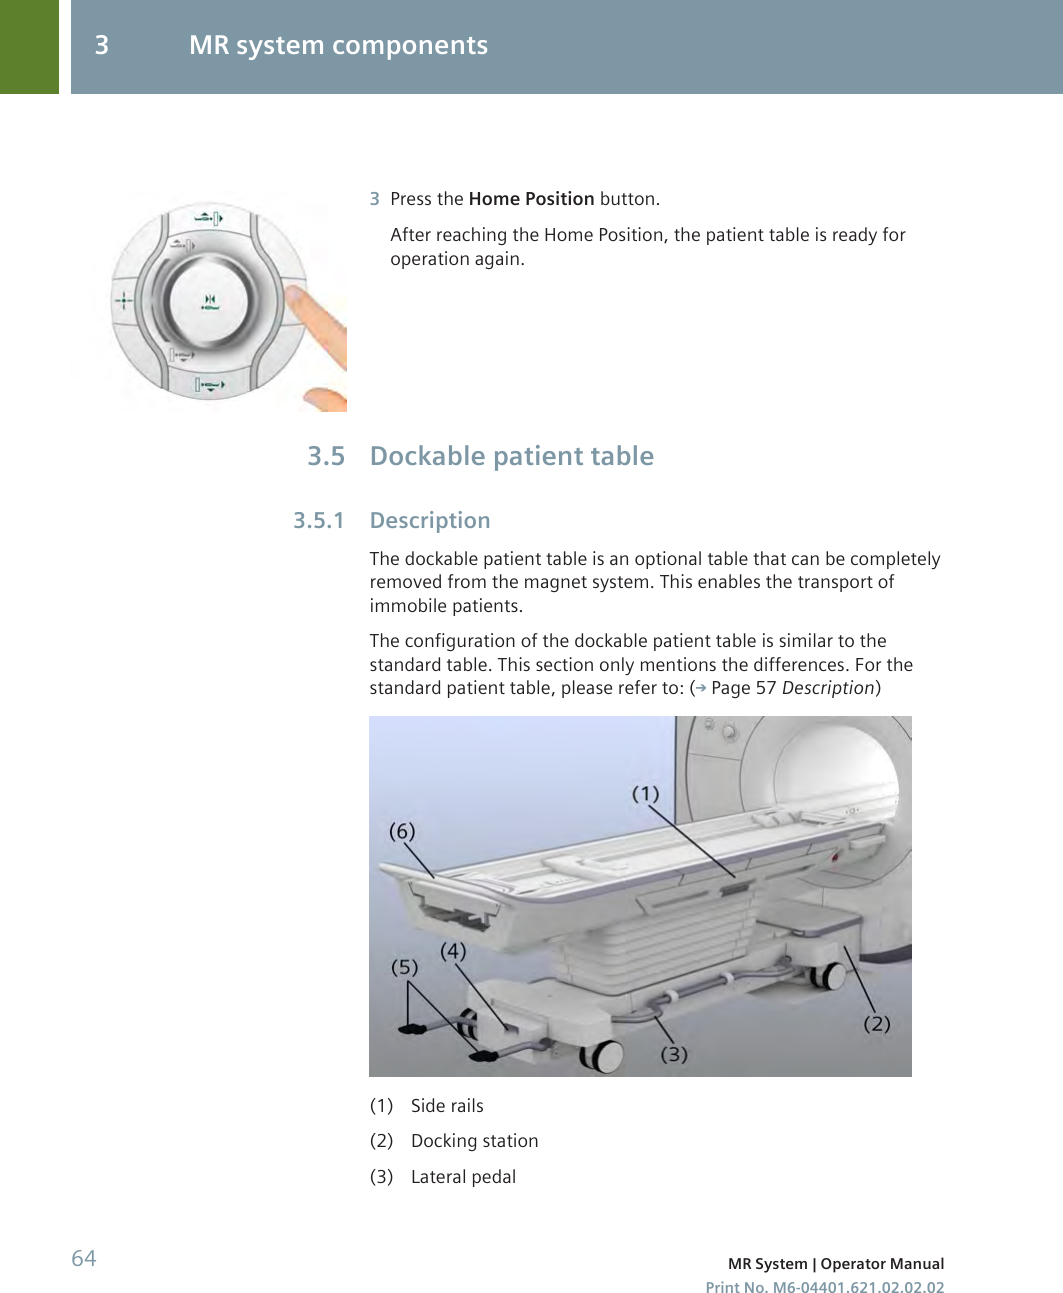 3Press the Home Position button.After reaching the Home Position, the patient table is ready foroperation again.Dockable patient tableDescriptionThe dockable patient table is an optional table that can be completelyremoved from the magnet system. This enables the transport ofimmobile patients.The configuration of the dockable patient table is similar to thestandard table. This section only mentions the differences. For thestandard patient table, please refer to: ( Page 57 Description)(1) Side rails(2) Docking station(3) Lateral pedal3.53.5.13 MR system components64 MR System | Operator ManualPrint No. M6-04401.621.02.02.02